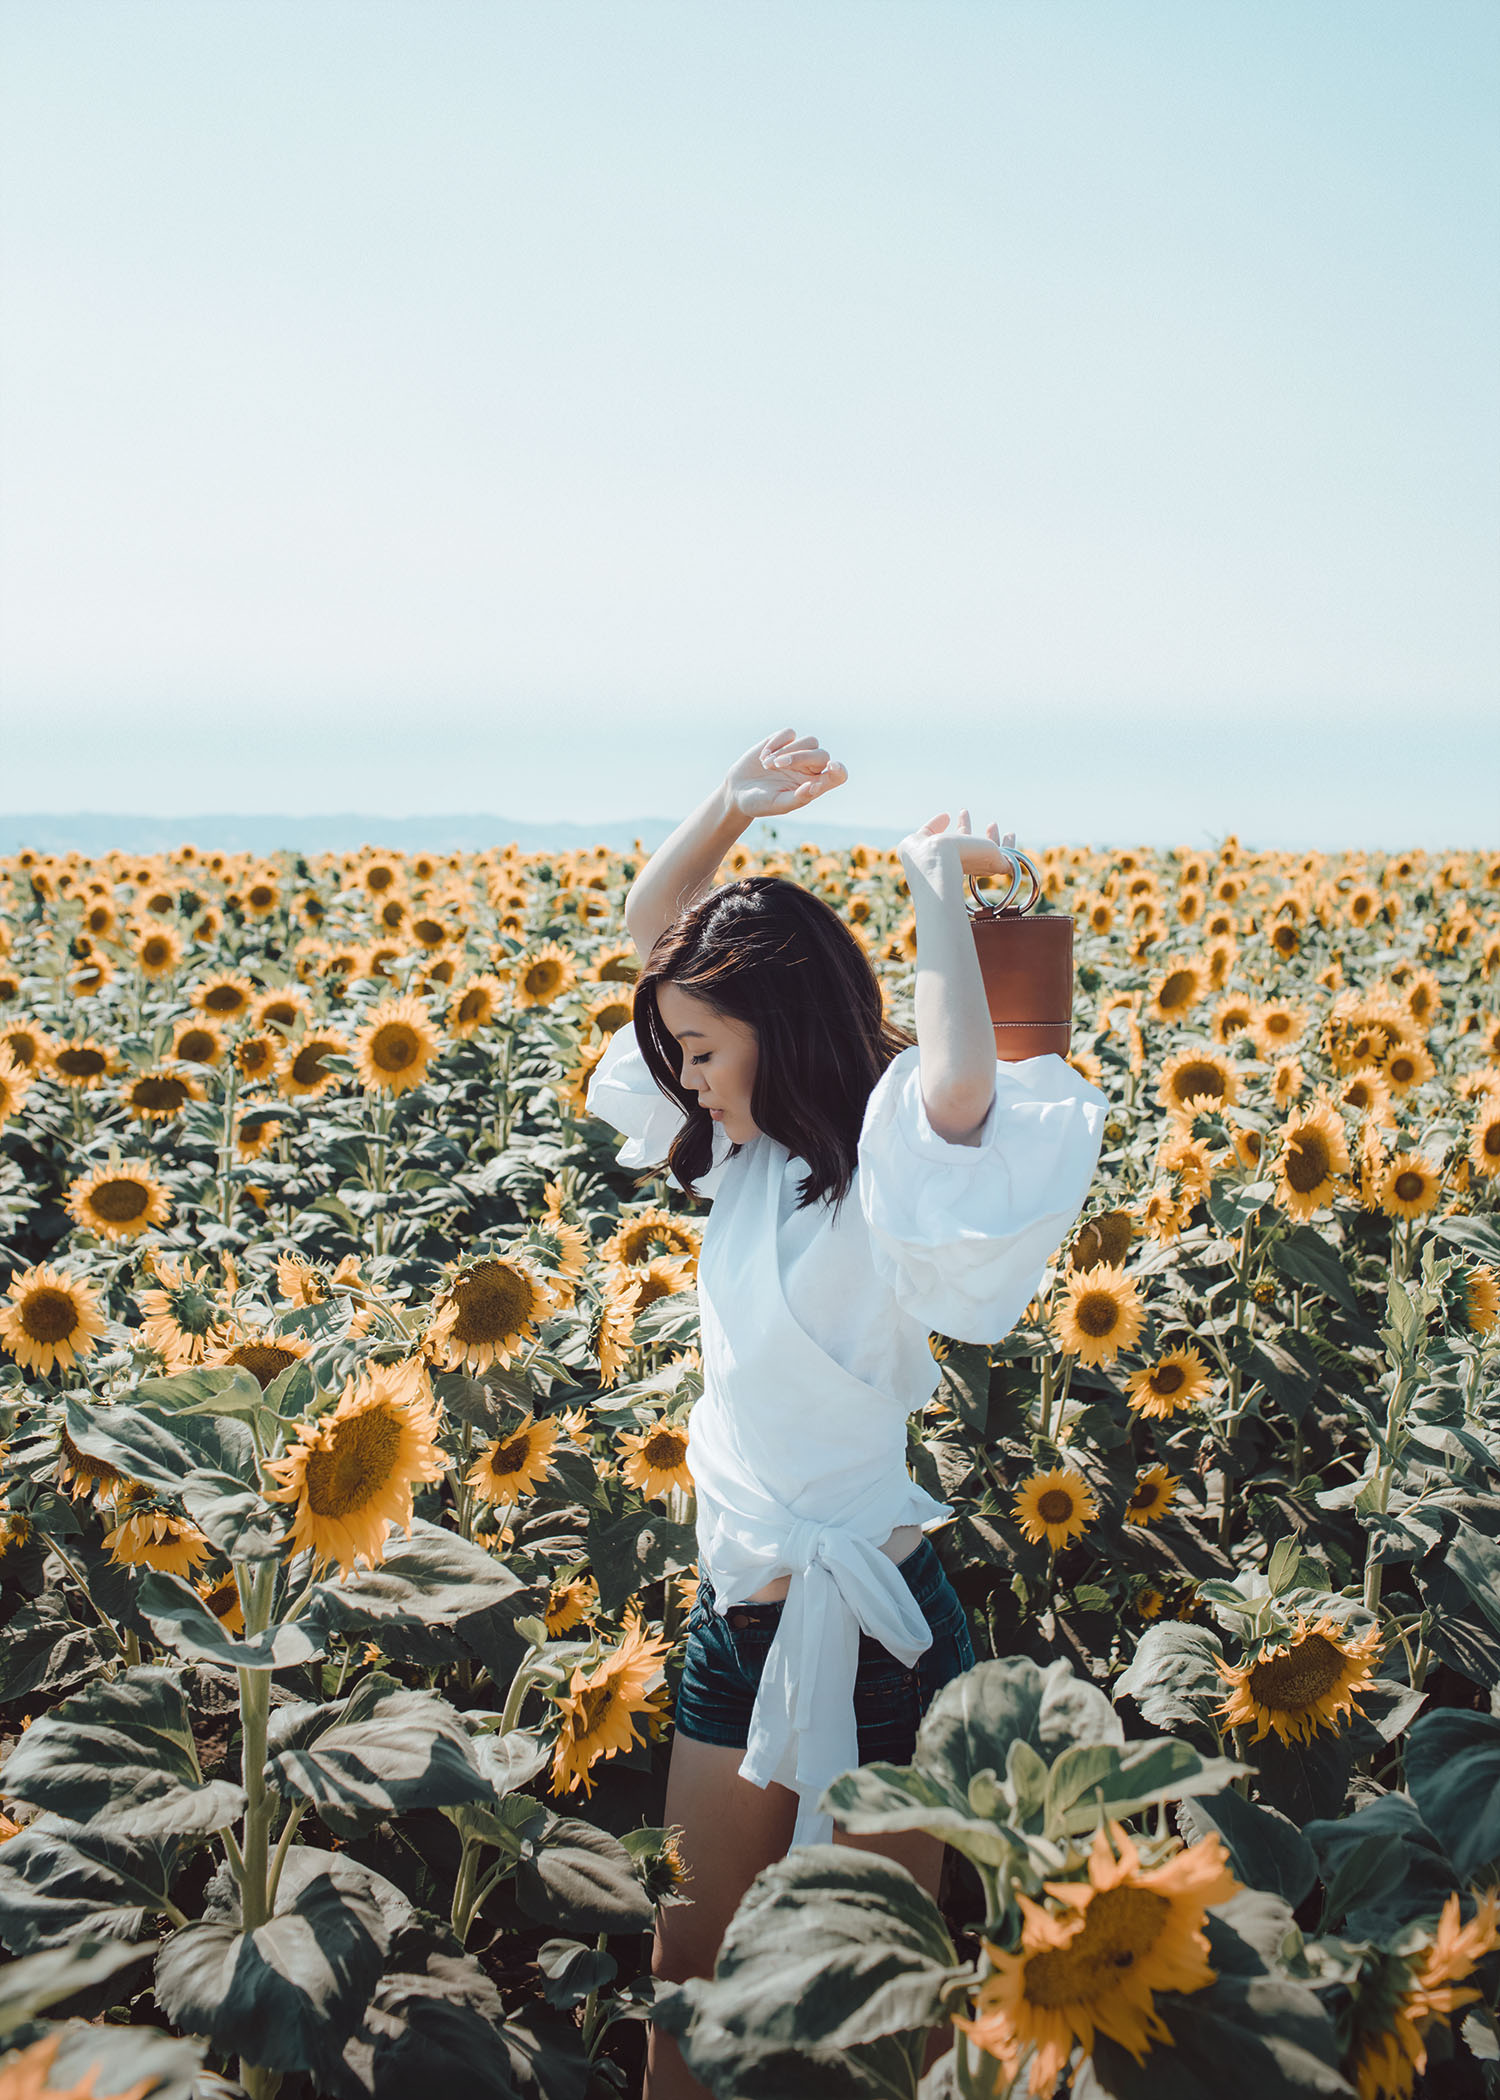 Street style fashion blogger influencer Jenny Tsang of Tsangtastic wearing white gathered ruffle puffed sleeve top denim shorts o-ring small leather bag simon miller bag in sunflower field in Davis California